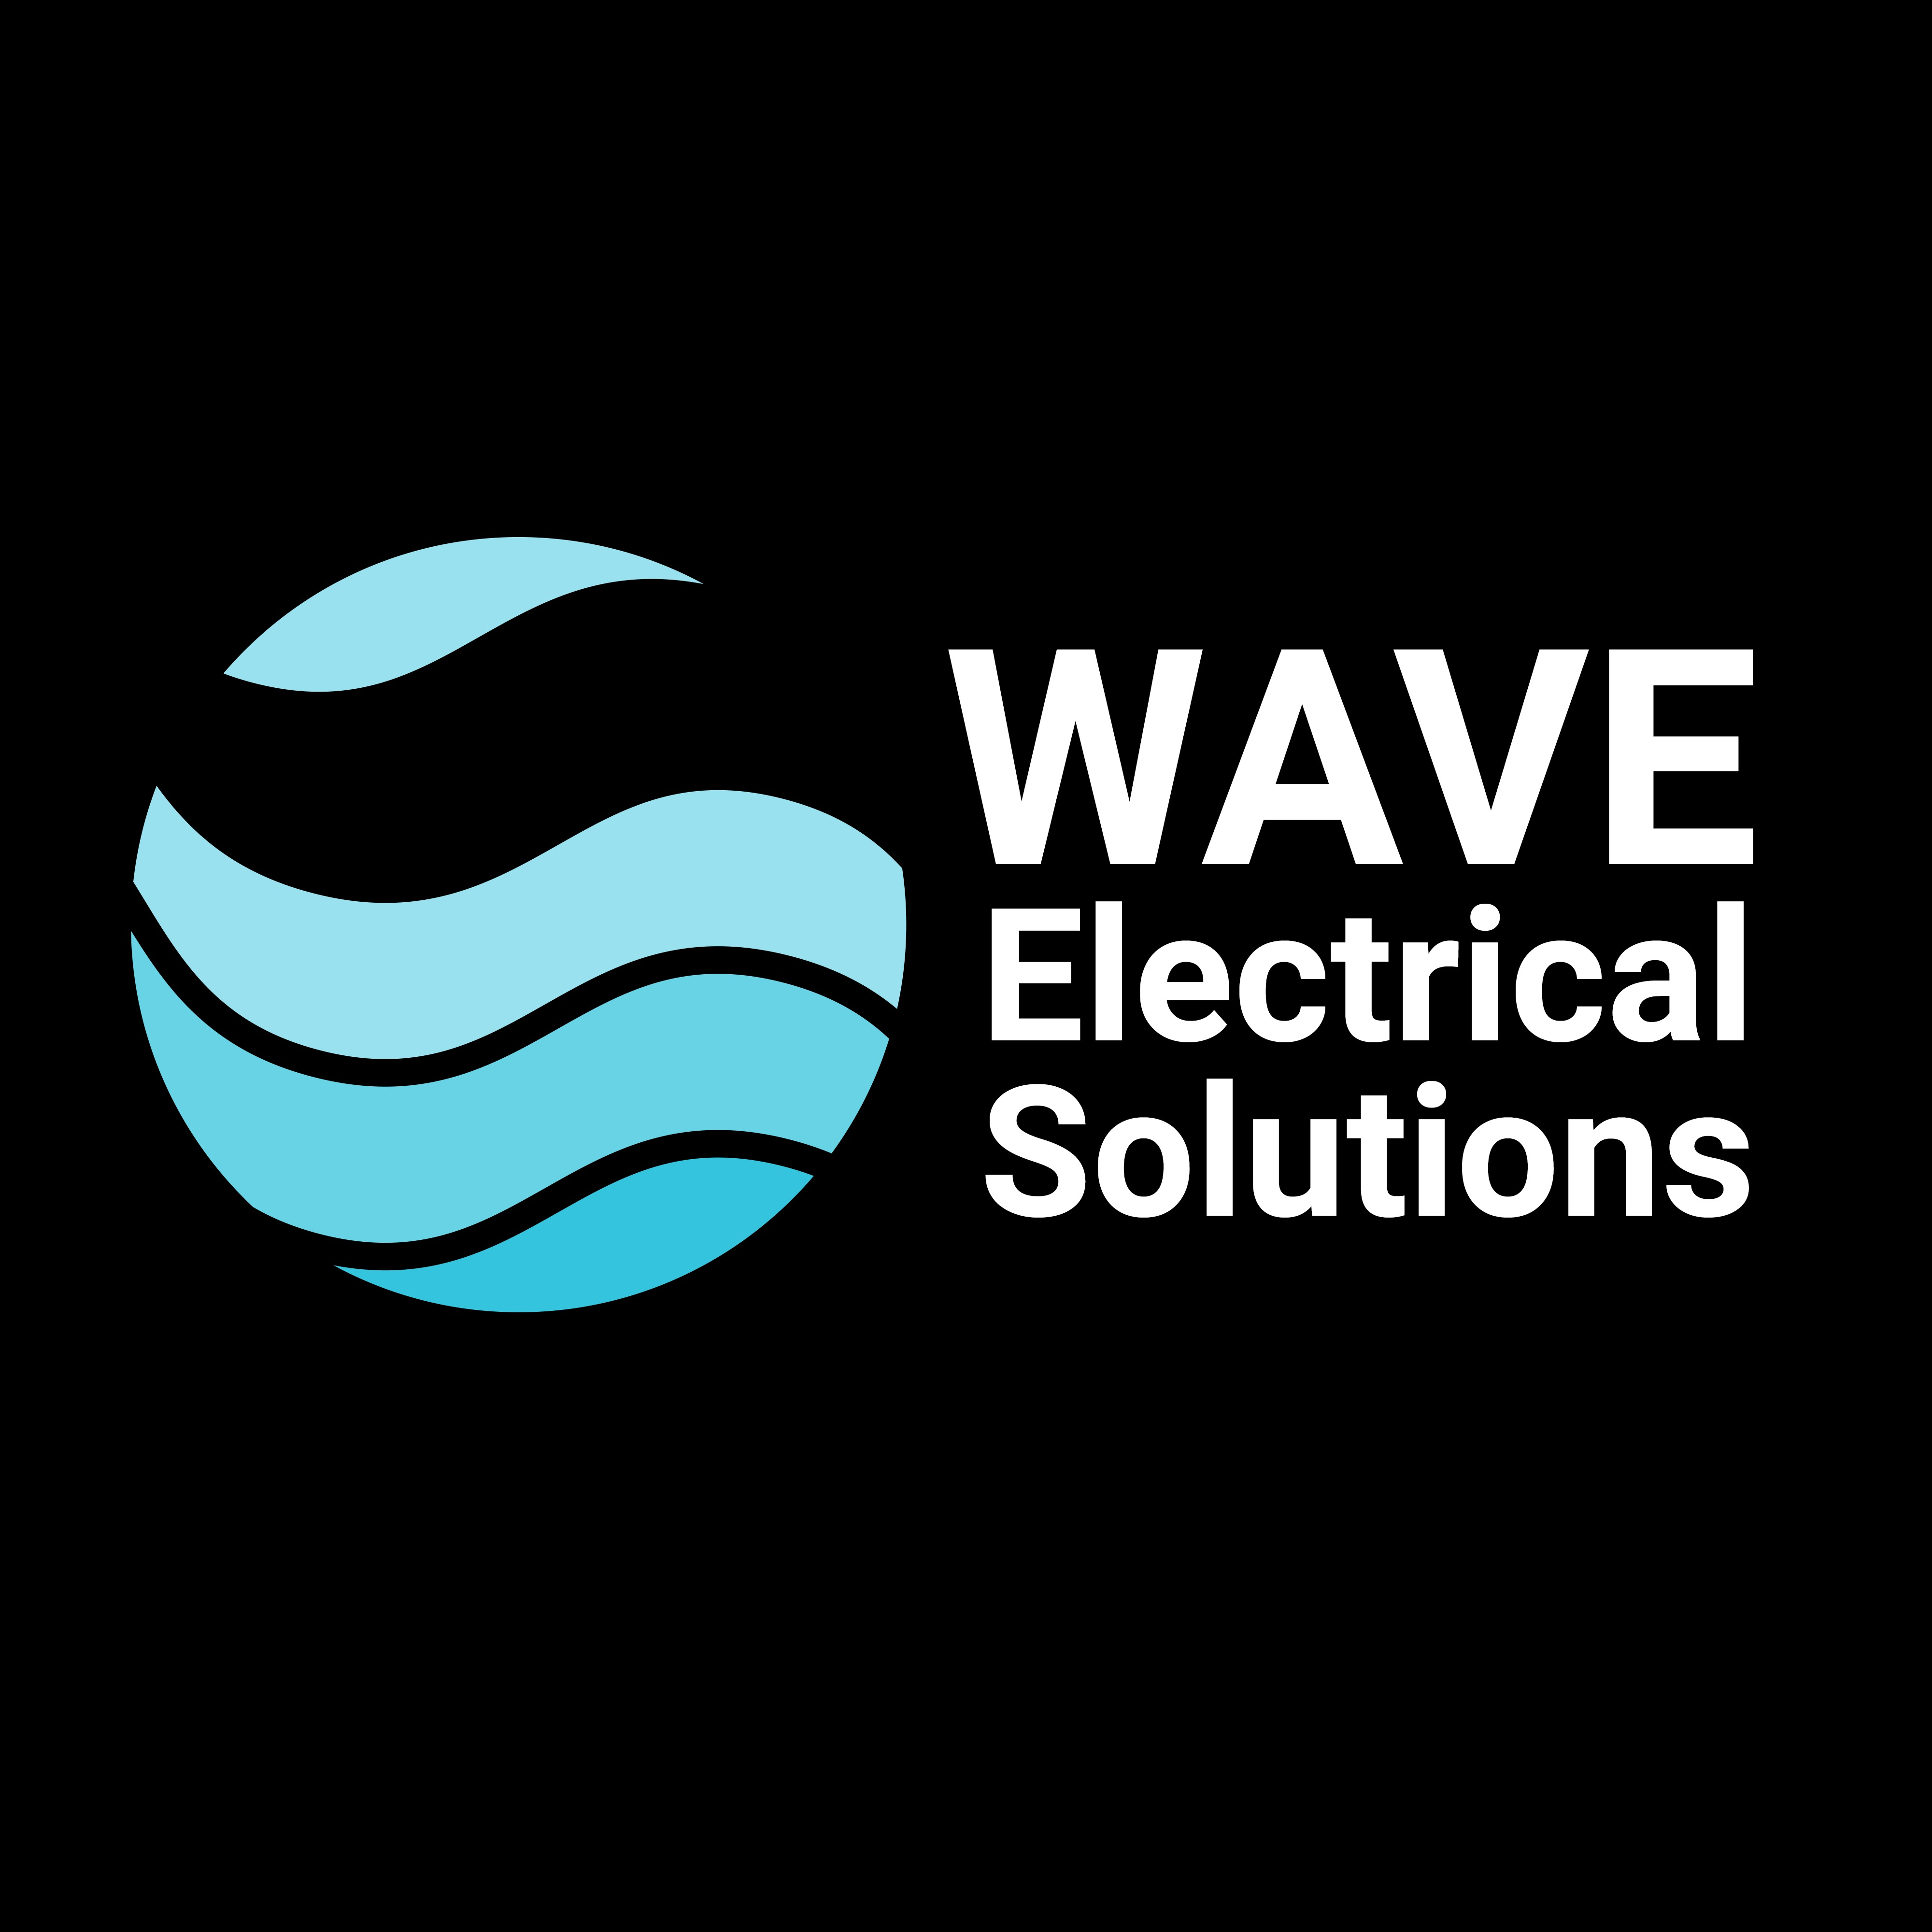 Wave Electrical Solutions Ltd - Newquay, Cornwall - 07441 114466 | ShowMeLocal.com